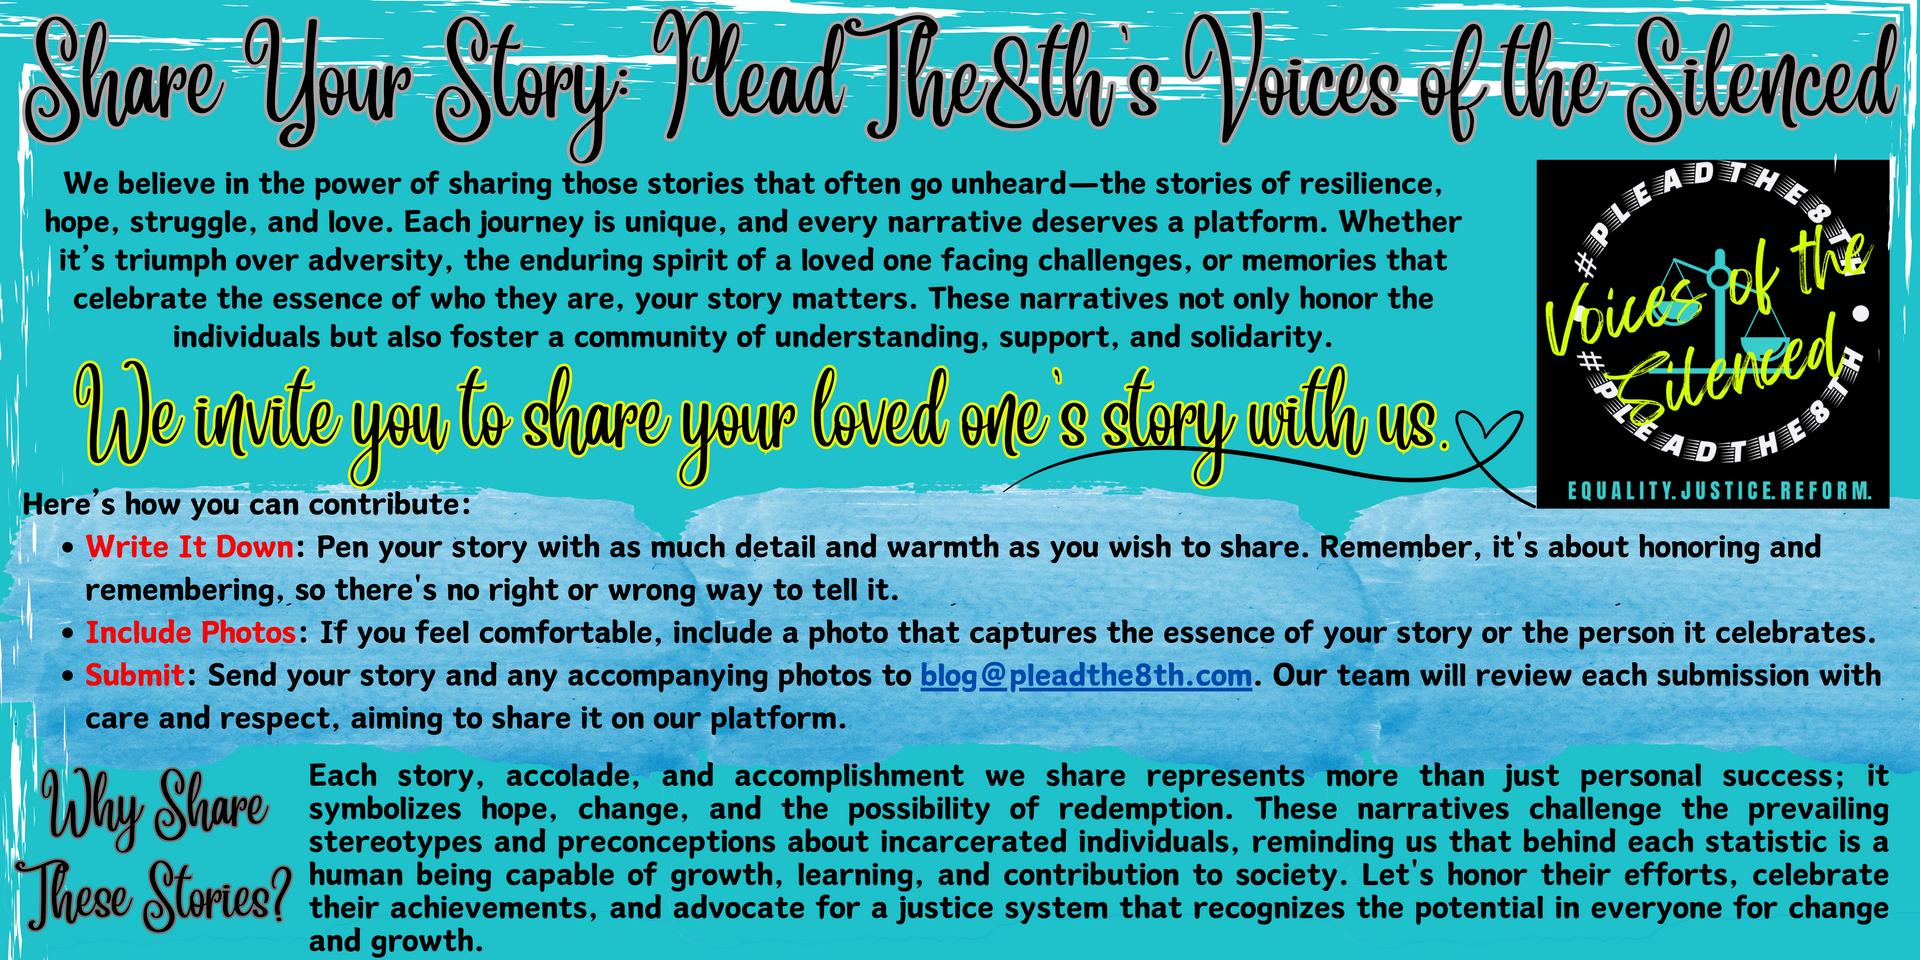 Share Your Story: PleadThe8th's Voices of the Silenced